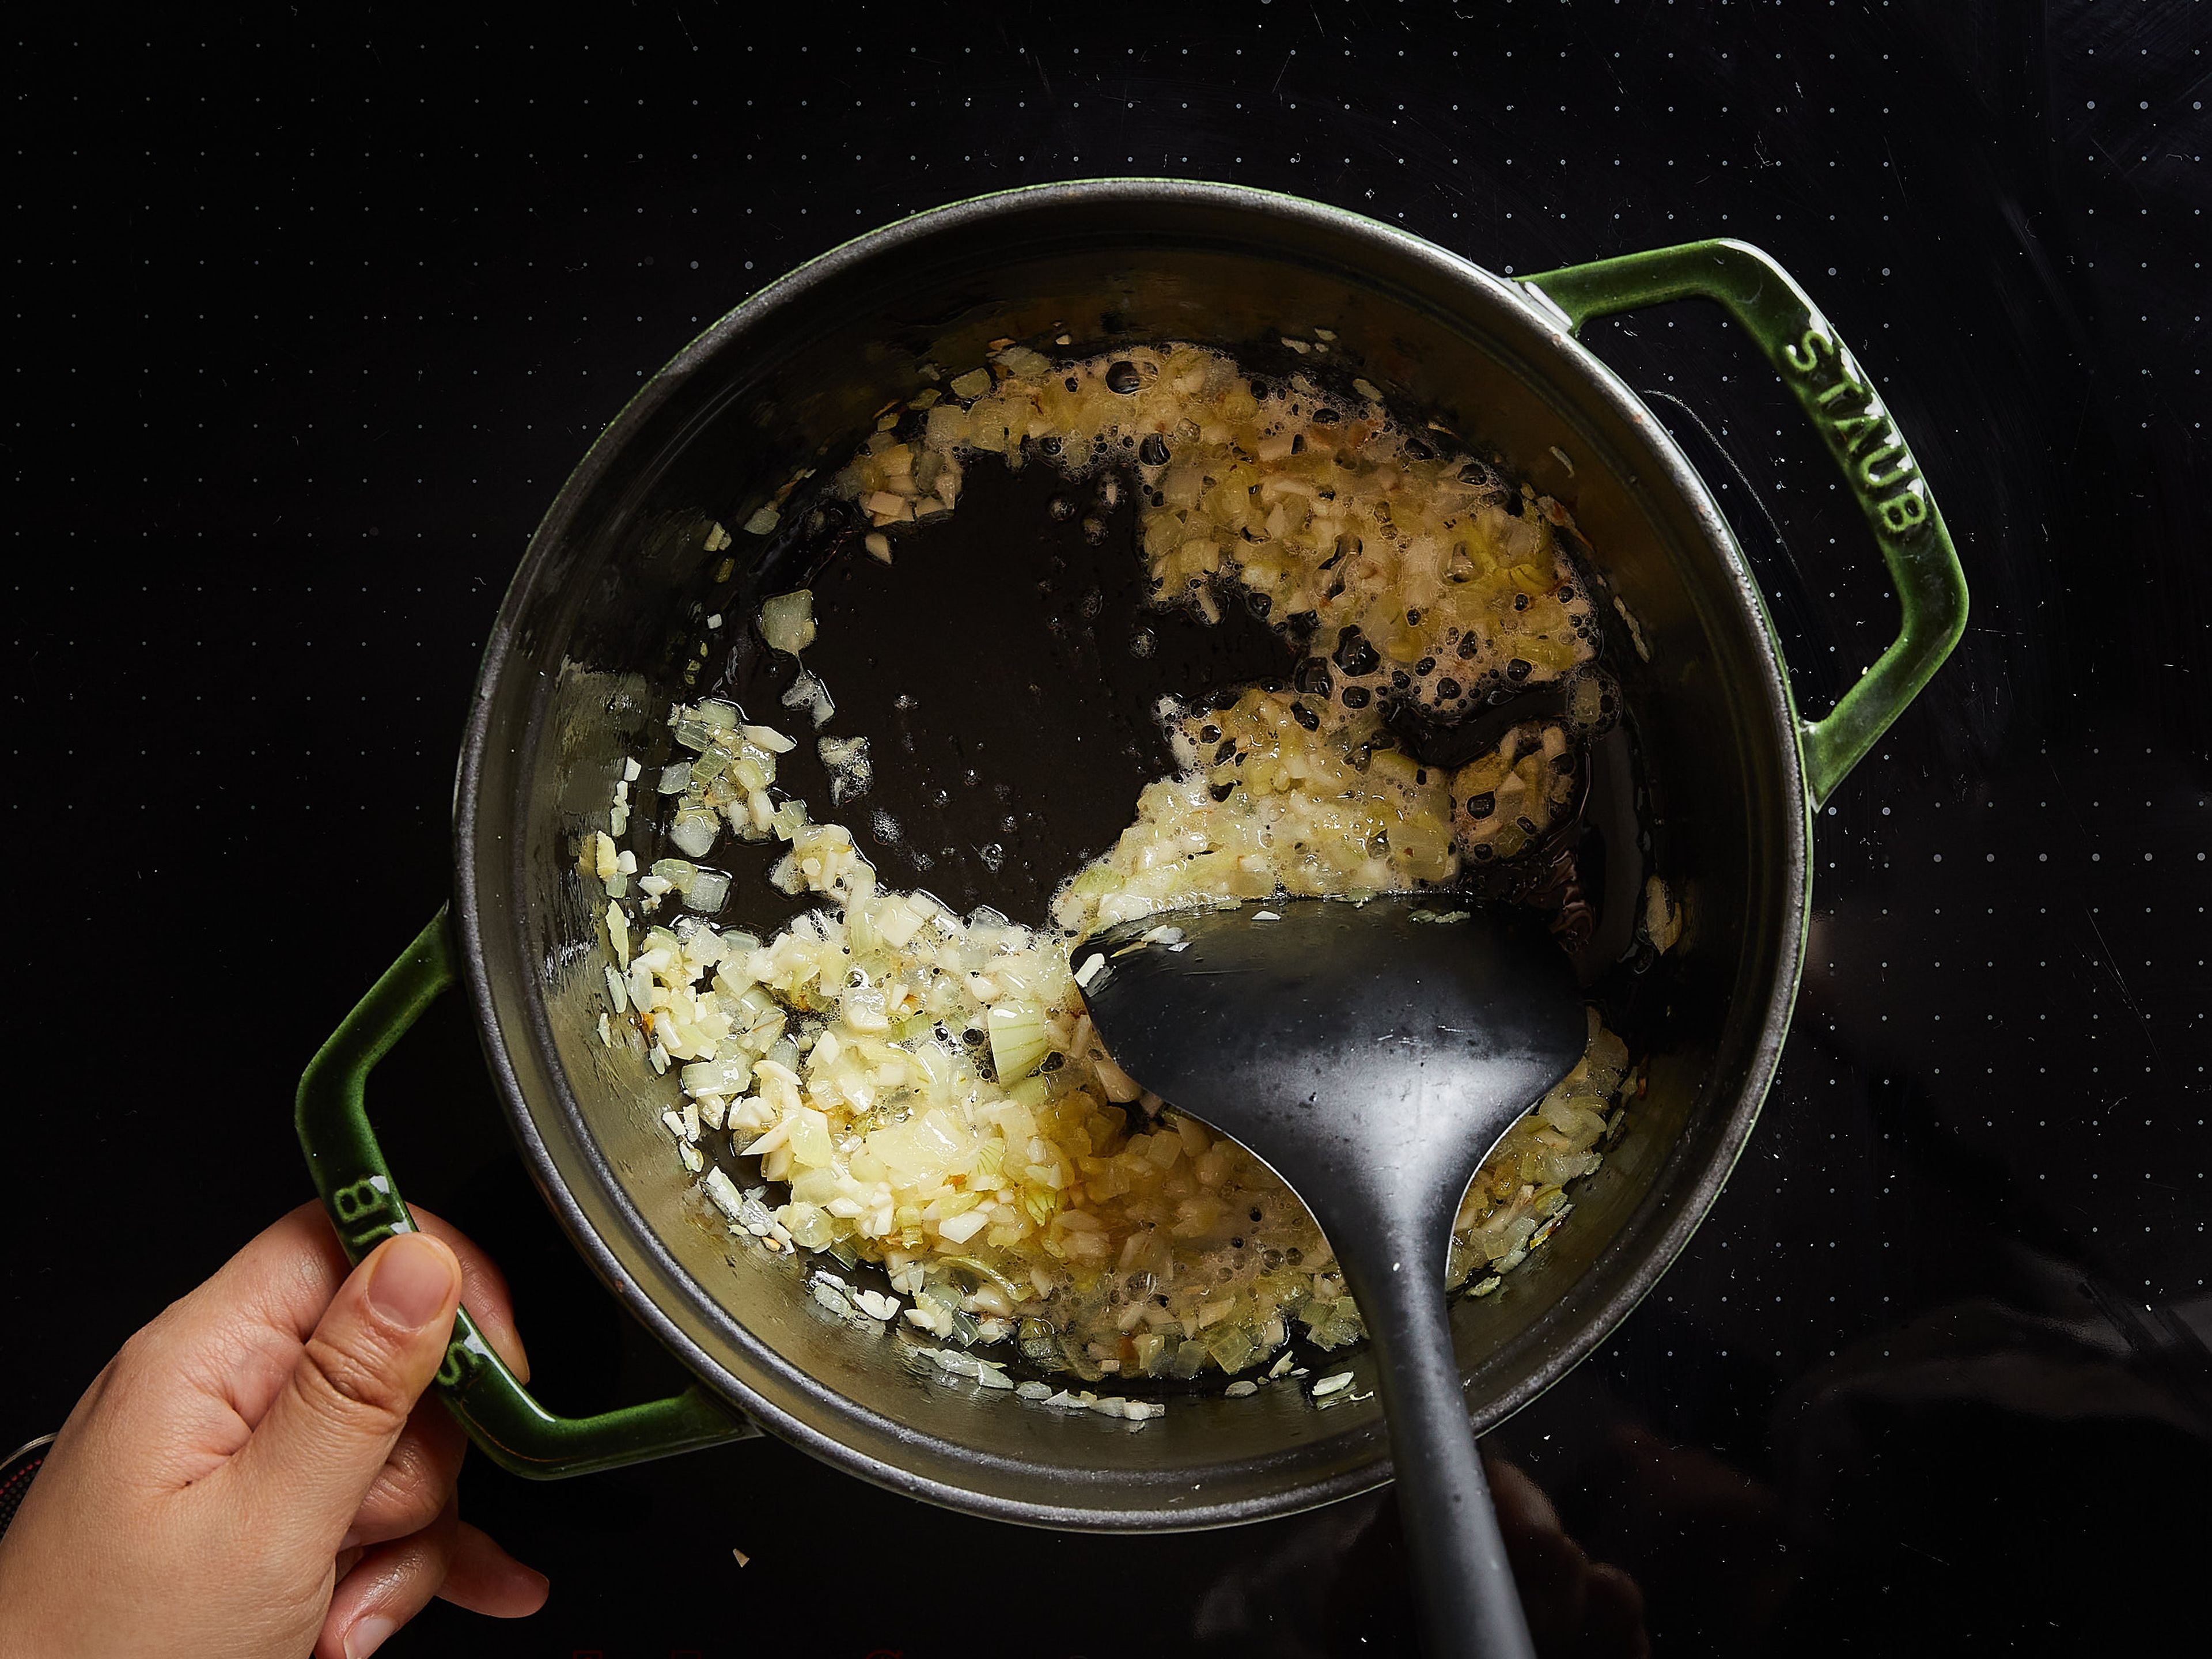 In a pot, heat coconut oil over medium heat. Add onion and fry for approx. 5 min., or until translucent, stirring often. Add garlic and ginger to fry briefly, until fragrant.